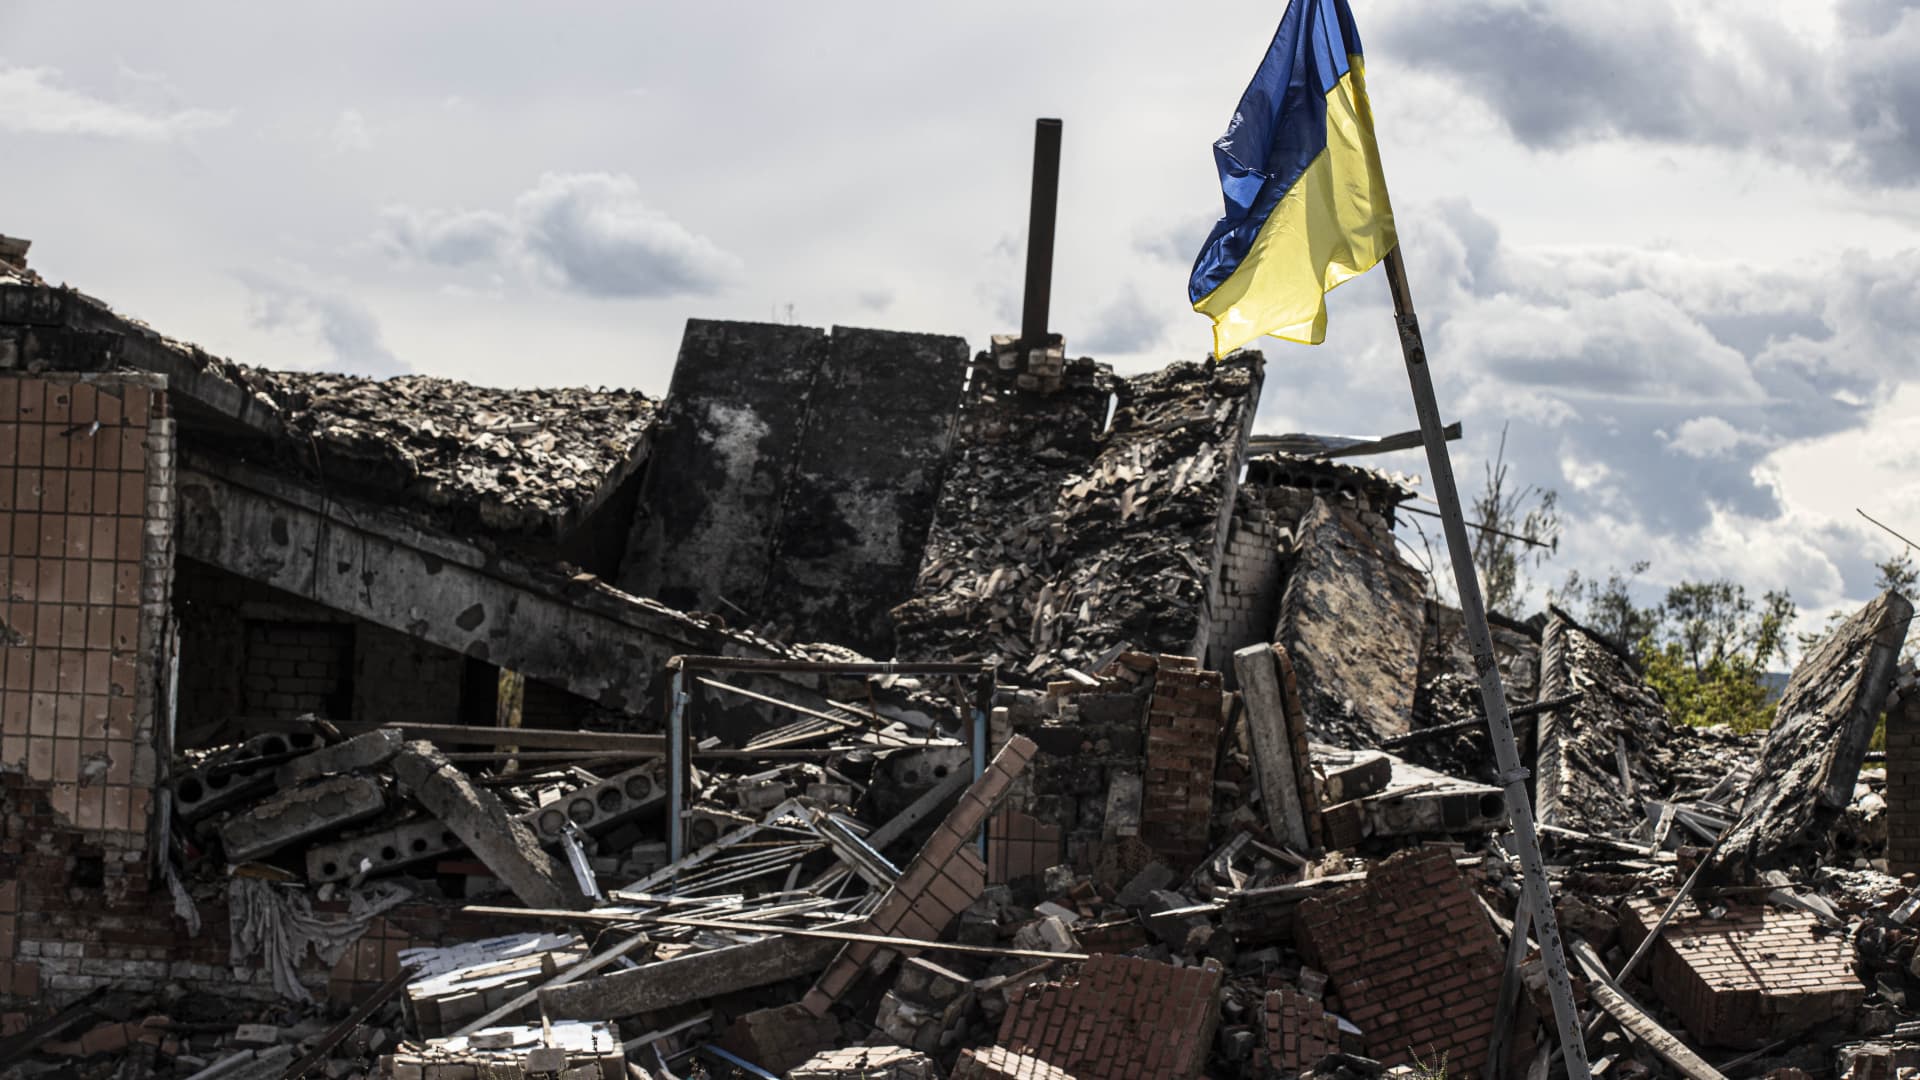 A Ukrainian flag waves in a residential area heavily damaged in the village of Dolyna in Donetsk Oblast, Ukraine after the withdrawal of Russian troops on September 24, 2022.